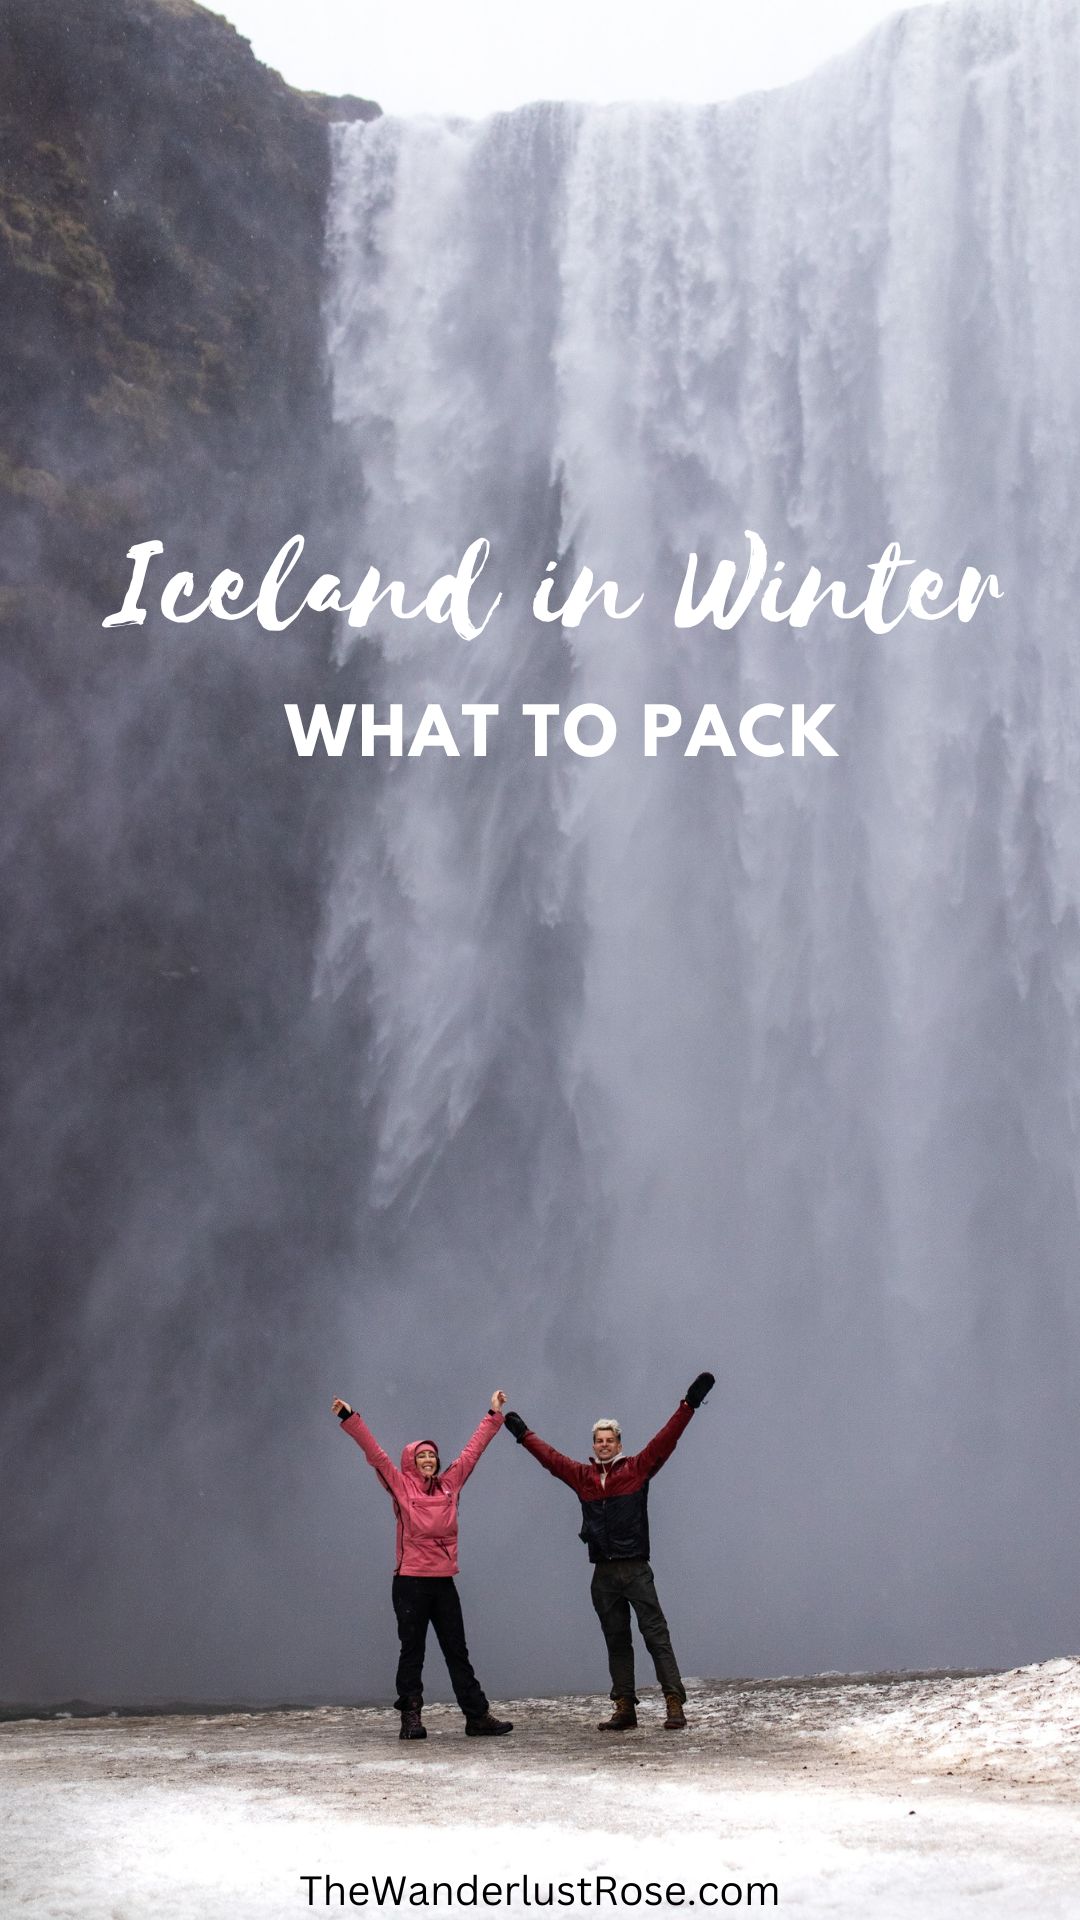 The Fashion Girl's Guide to Iceland: What to Pack, See and Eat